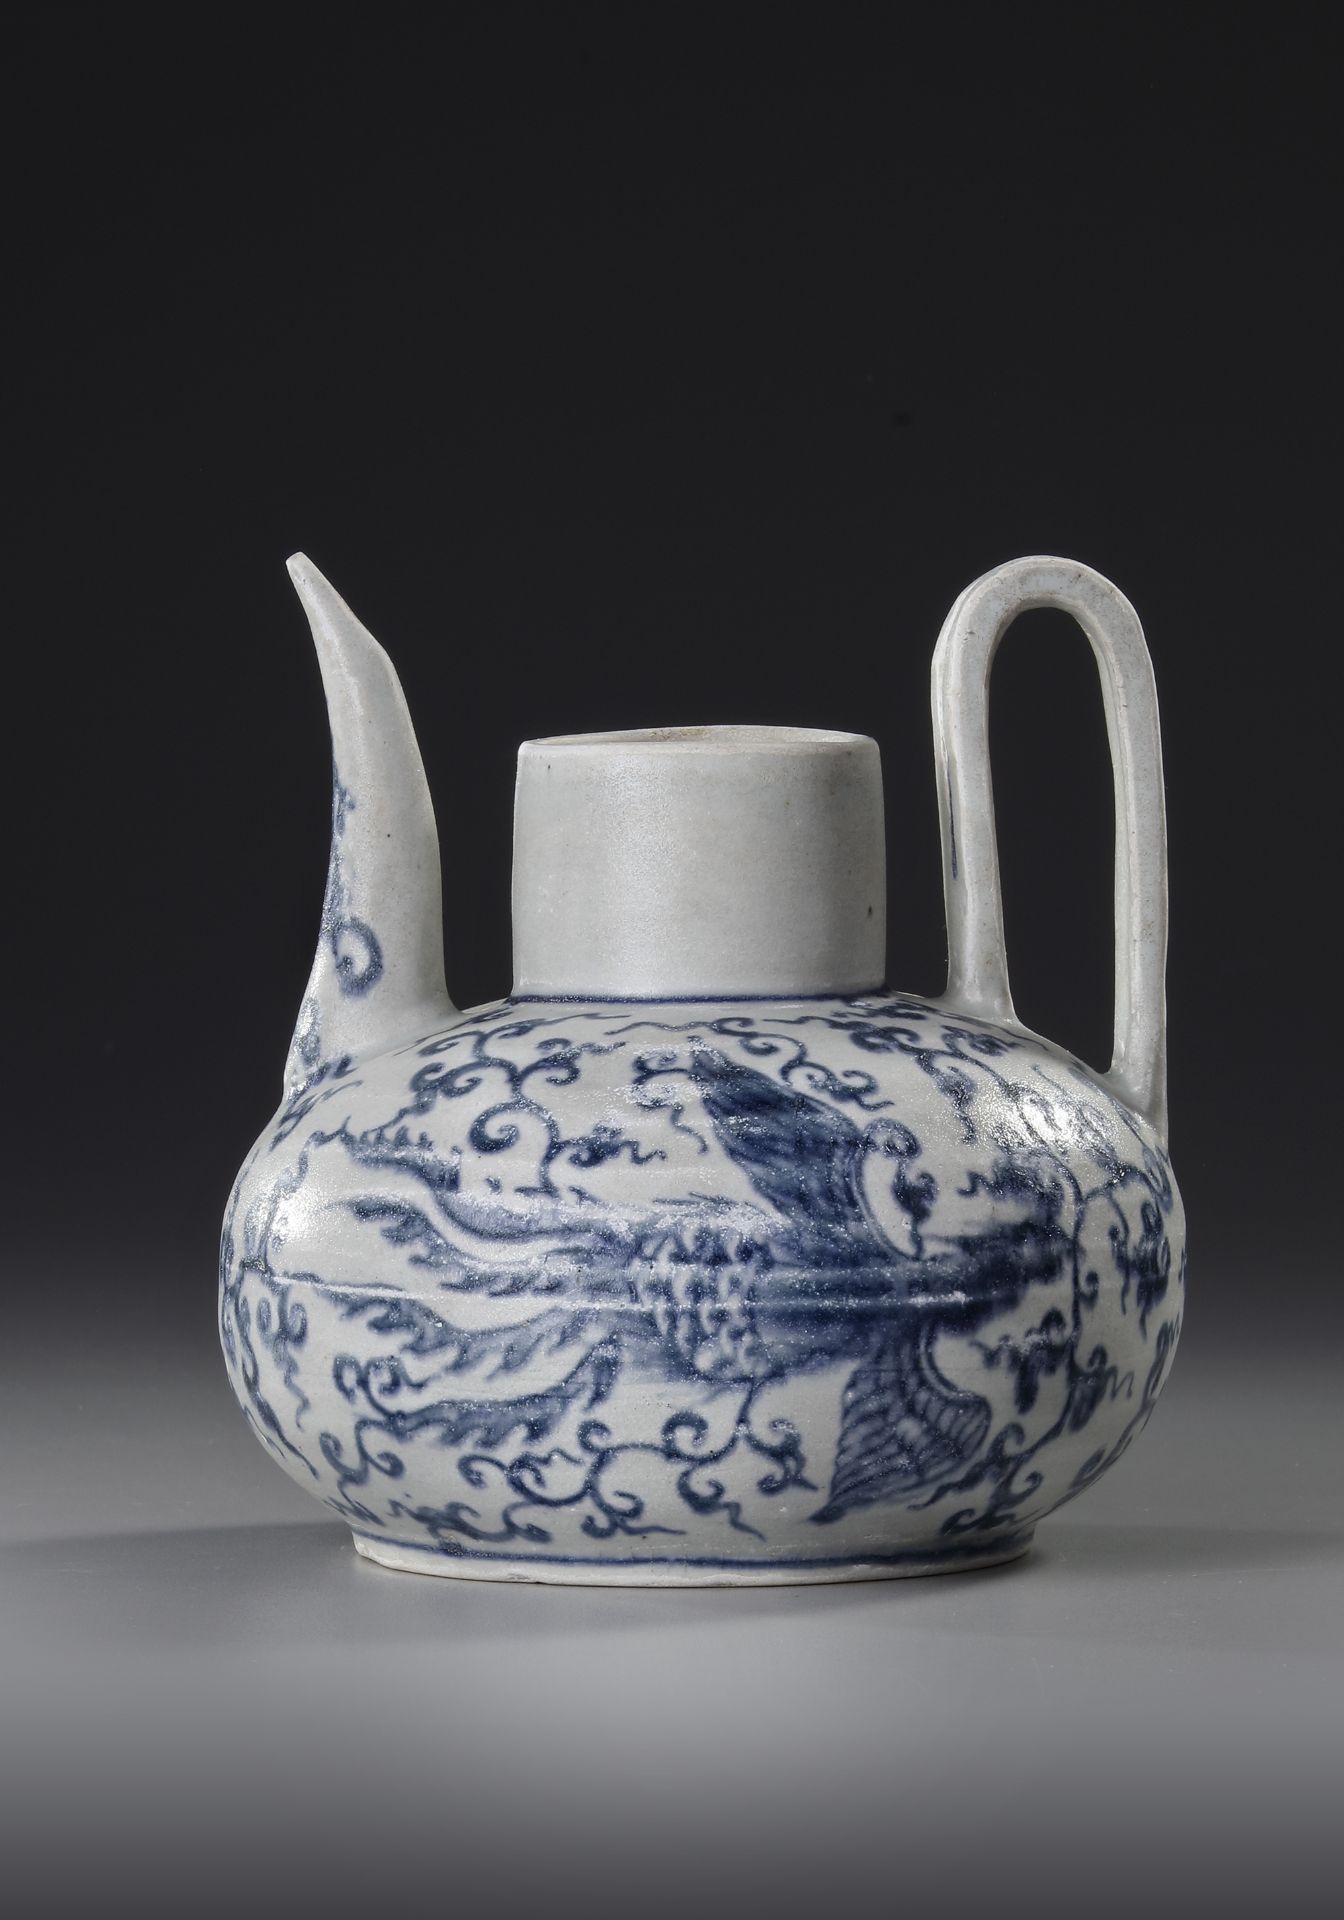 FOUR CHINESE BLUE AND WHITE WARES, MING DYNASTY (1368-1644) - Image 3 of 6